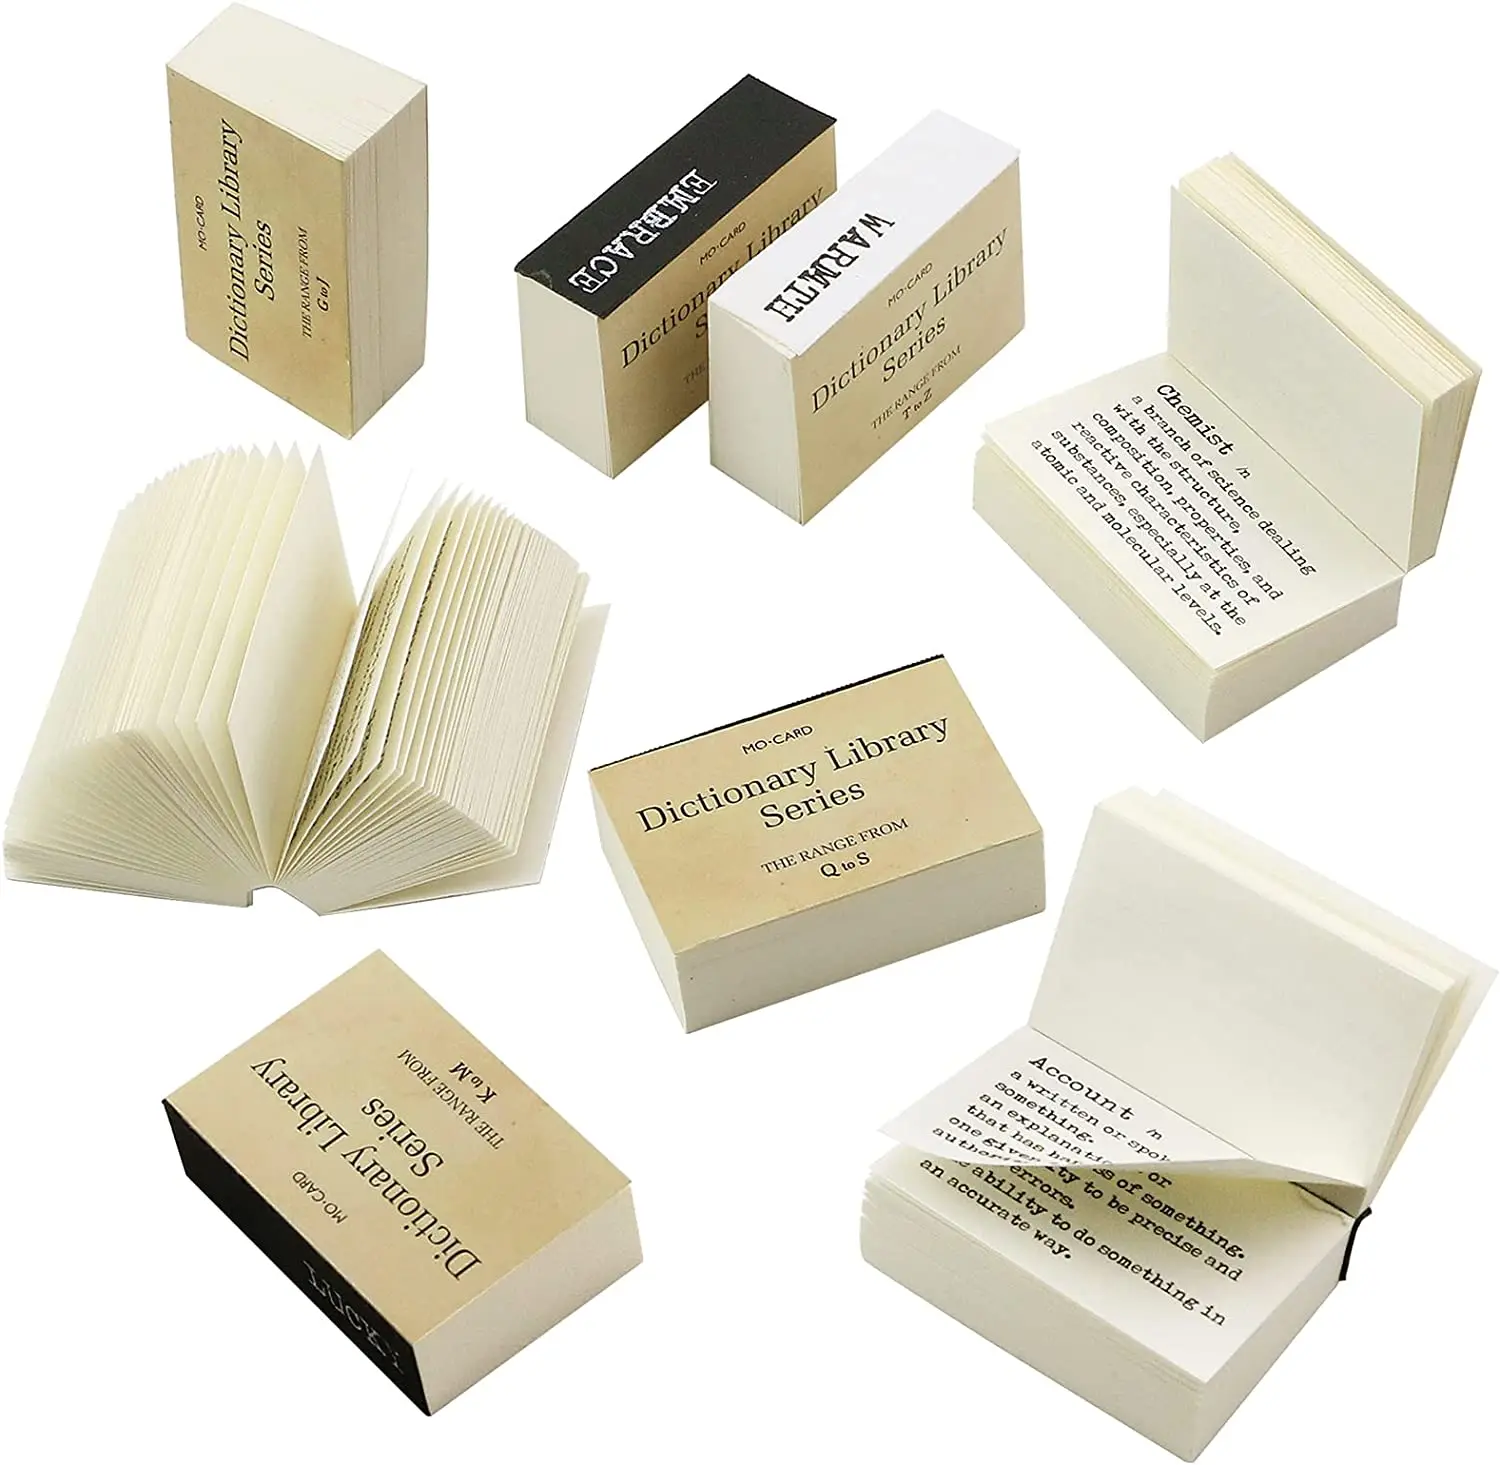 800 Pcs Mini Vintage Tiny Dictionary Decorative Craft Papers for Journal Planners memo pad Scrapbooking Supplies(from A to Z)